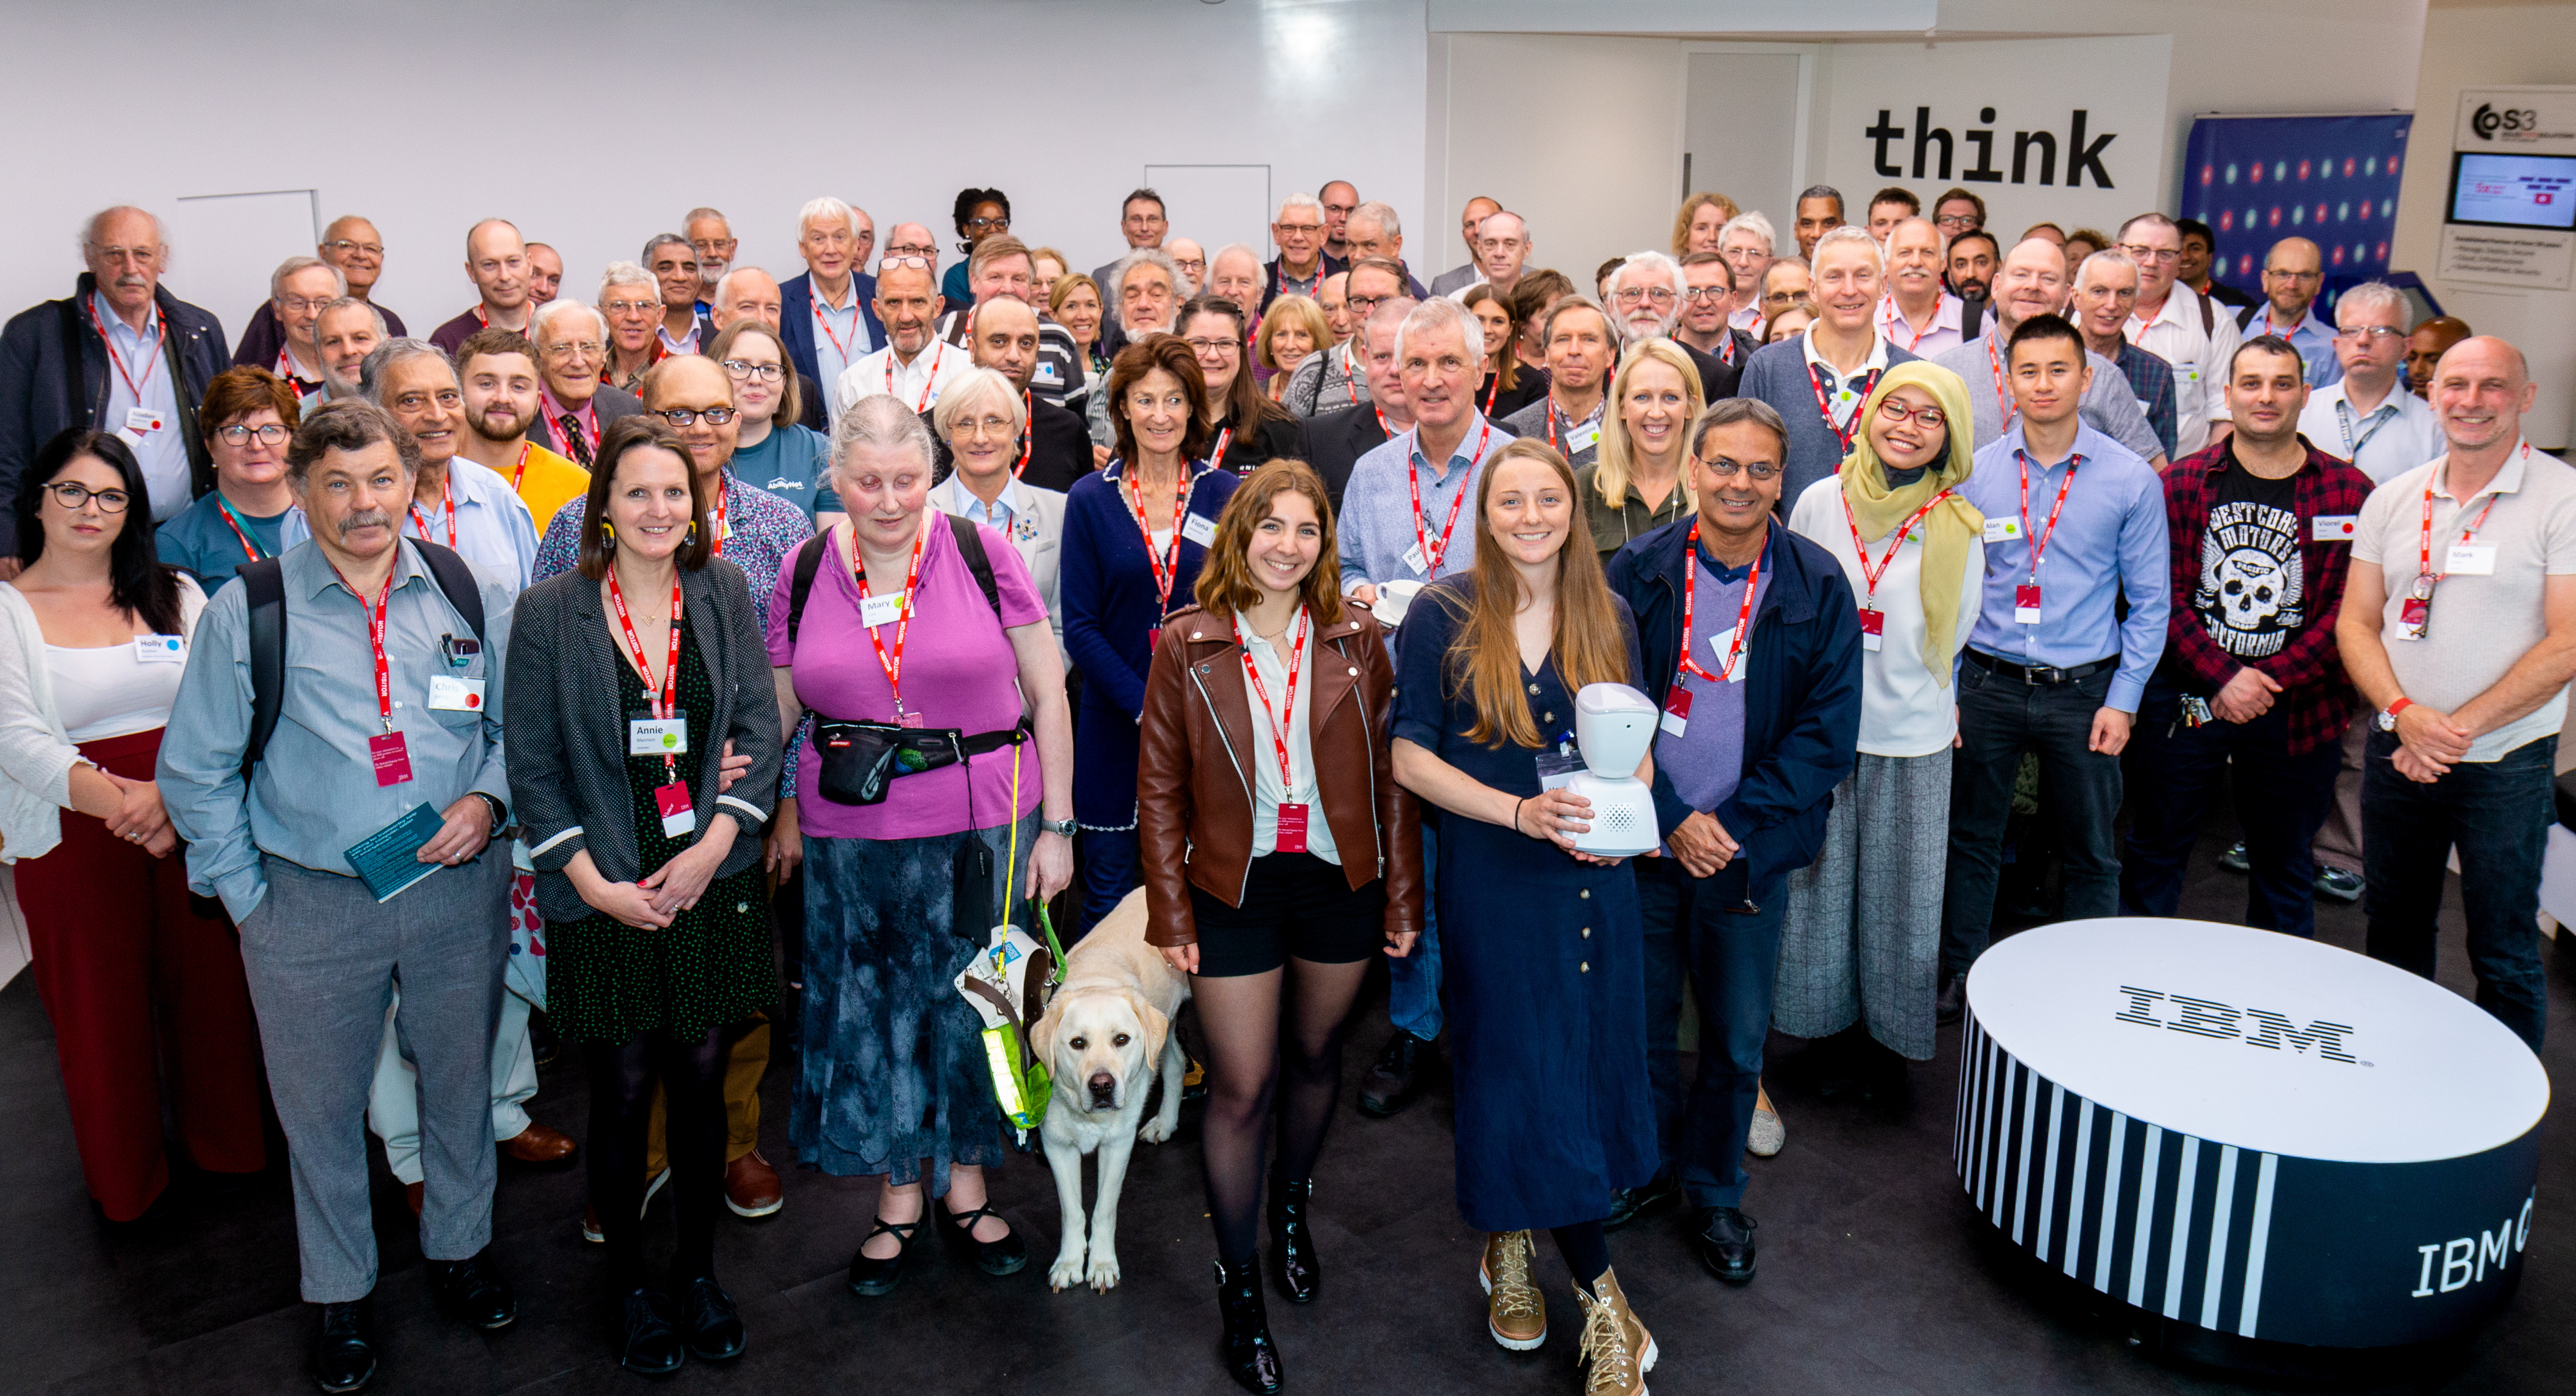 AbilityNet and RNIB volunteers standing together at the event, smiling facing the camera